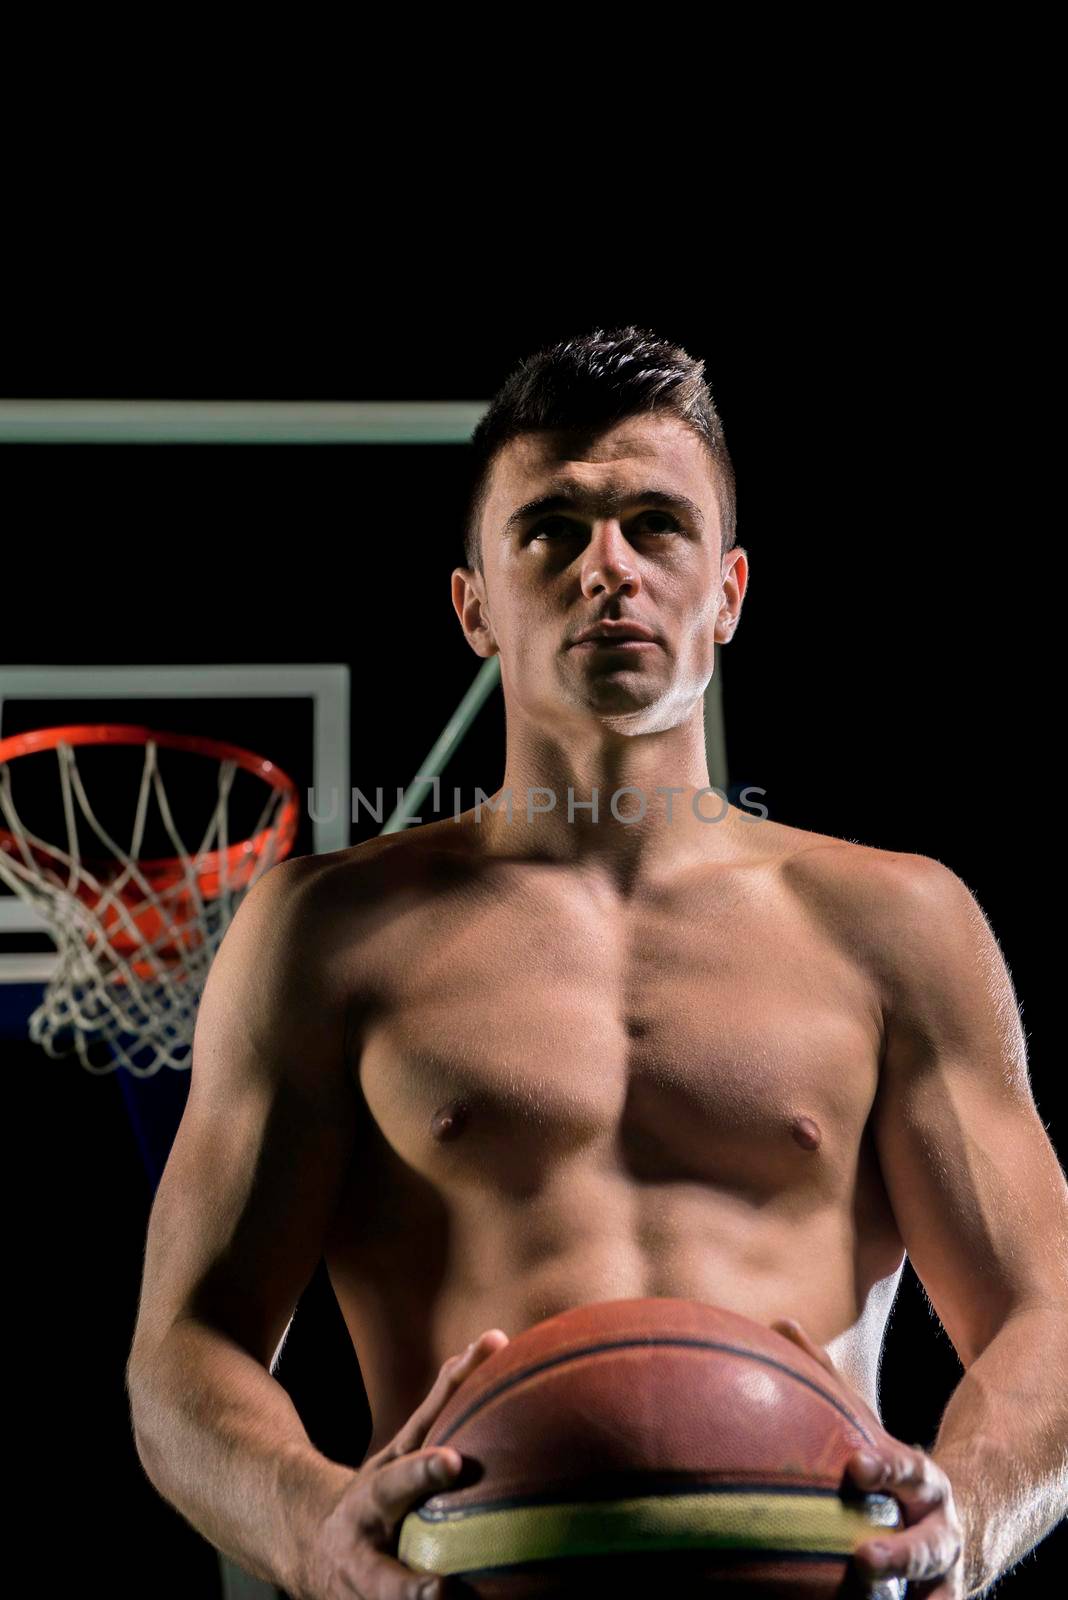 Basketball player portrait  on basketball court holding ball with black isolated background